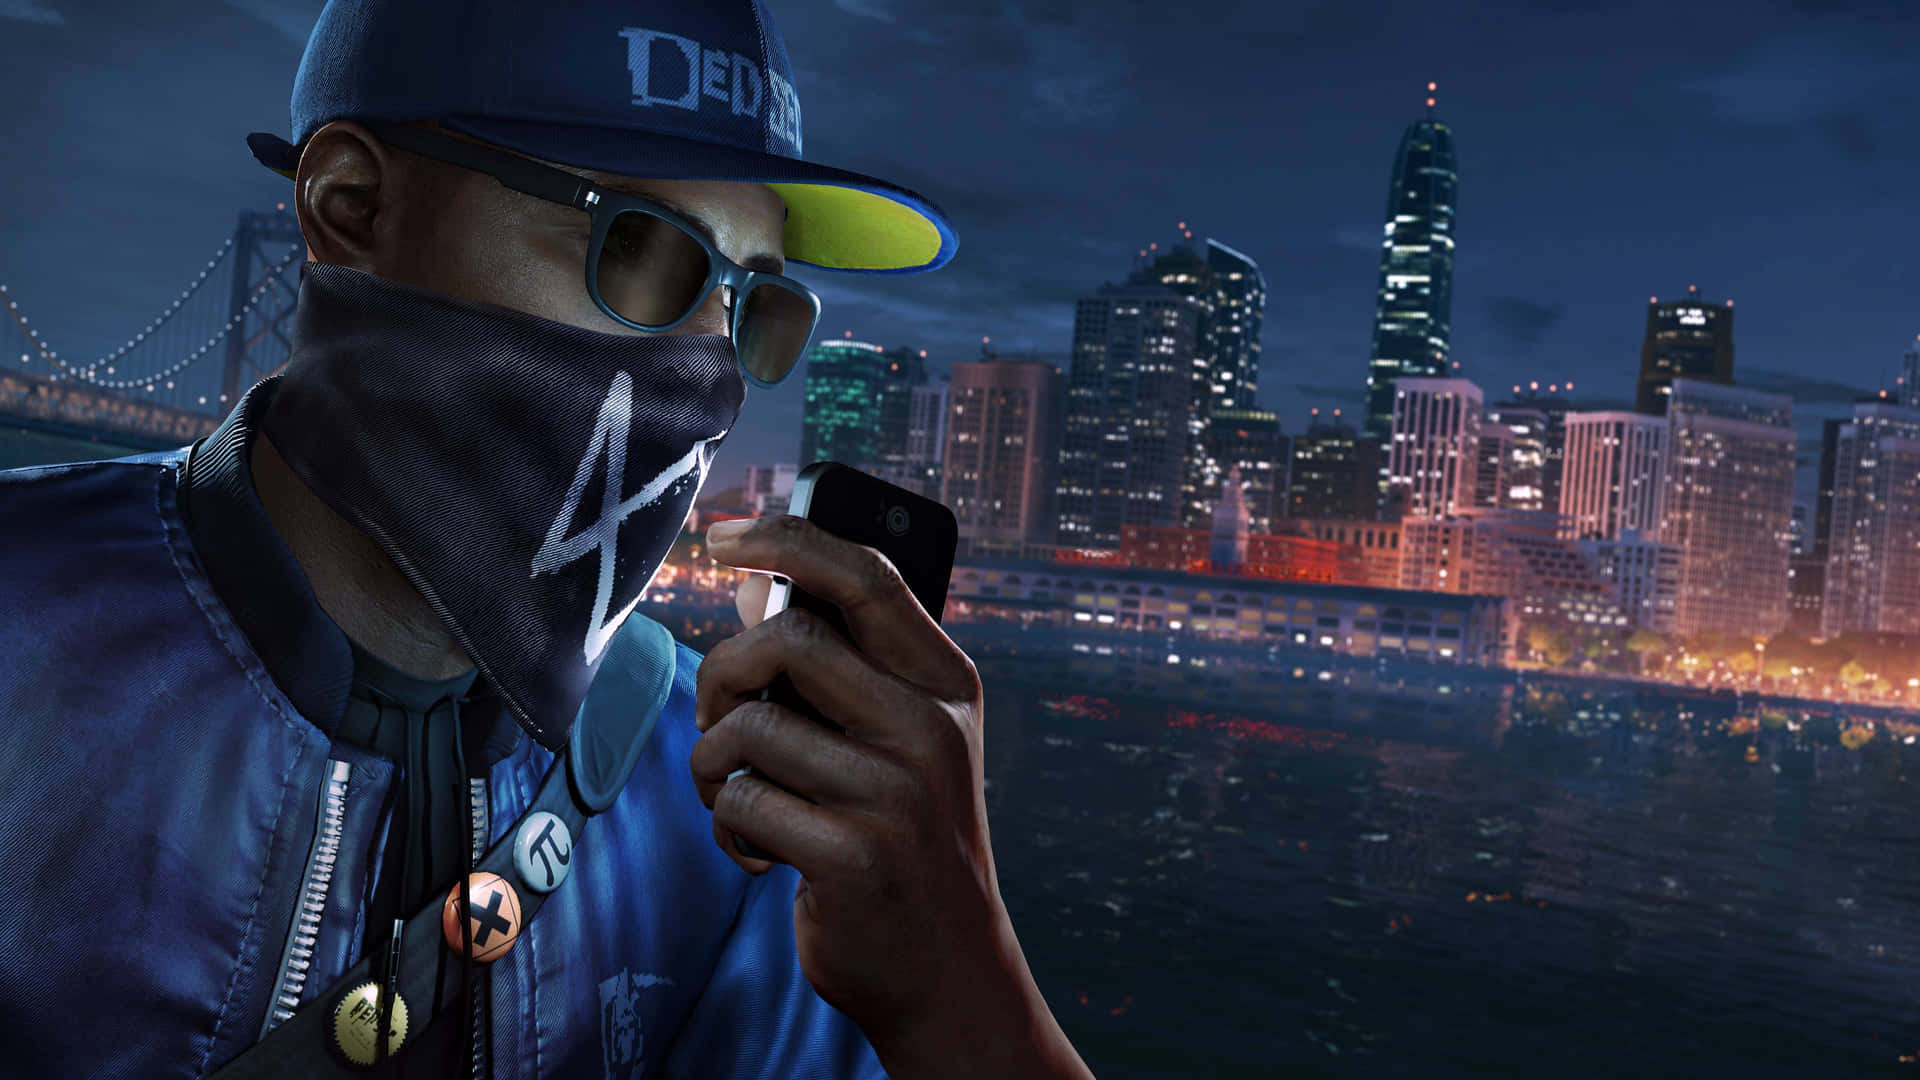 Cool Ps4 Character Marcus Holloway From Watch Dogs 2 Game Background